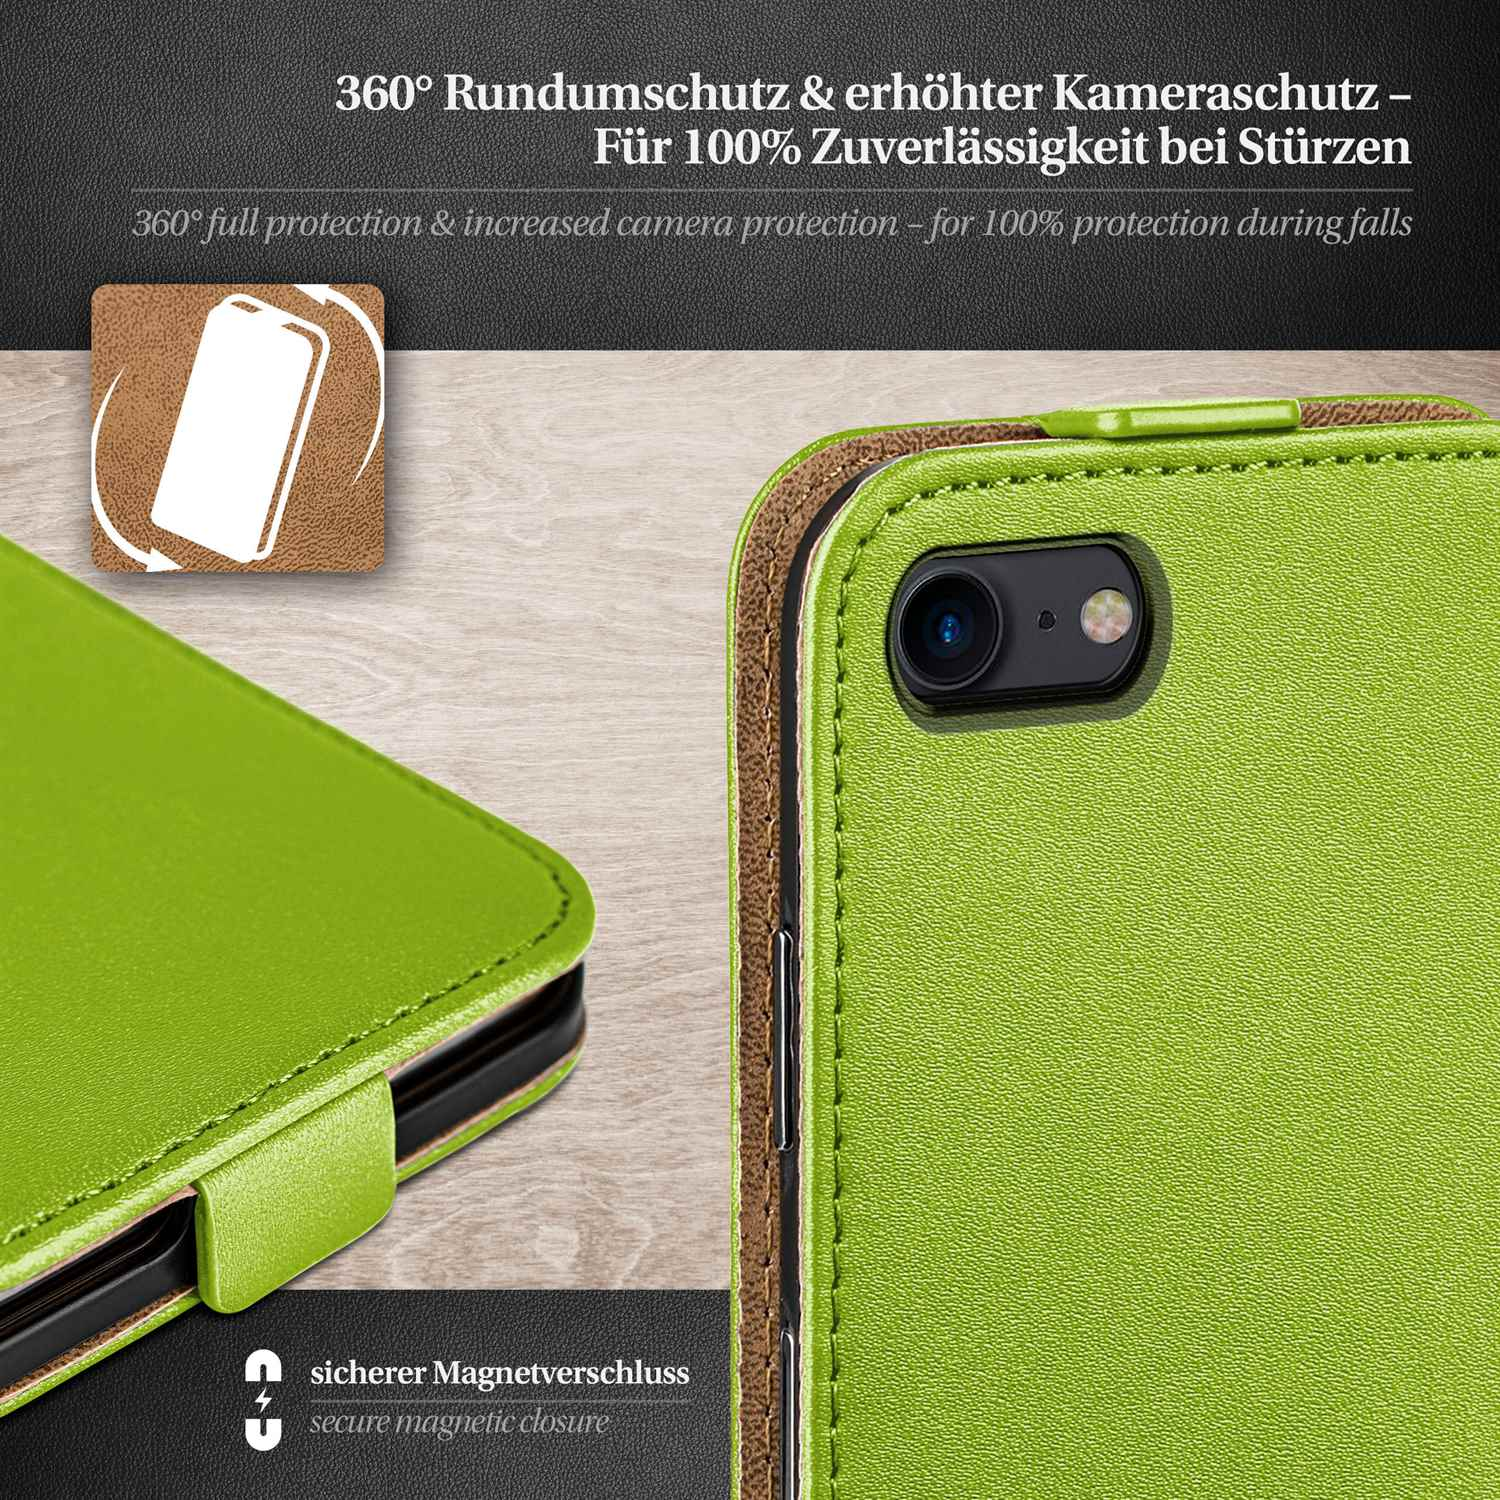 Cover, Flip MOEX Flip Lime-Green 2, Samsung, Case, S Duos Galaxy